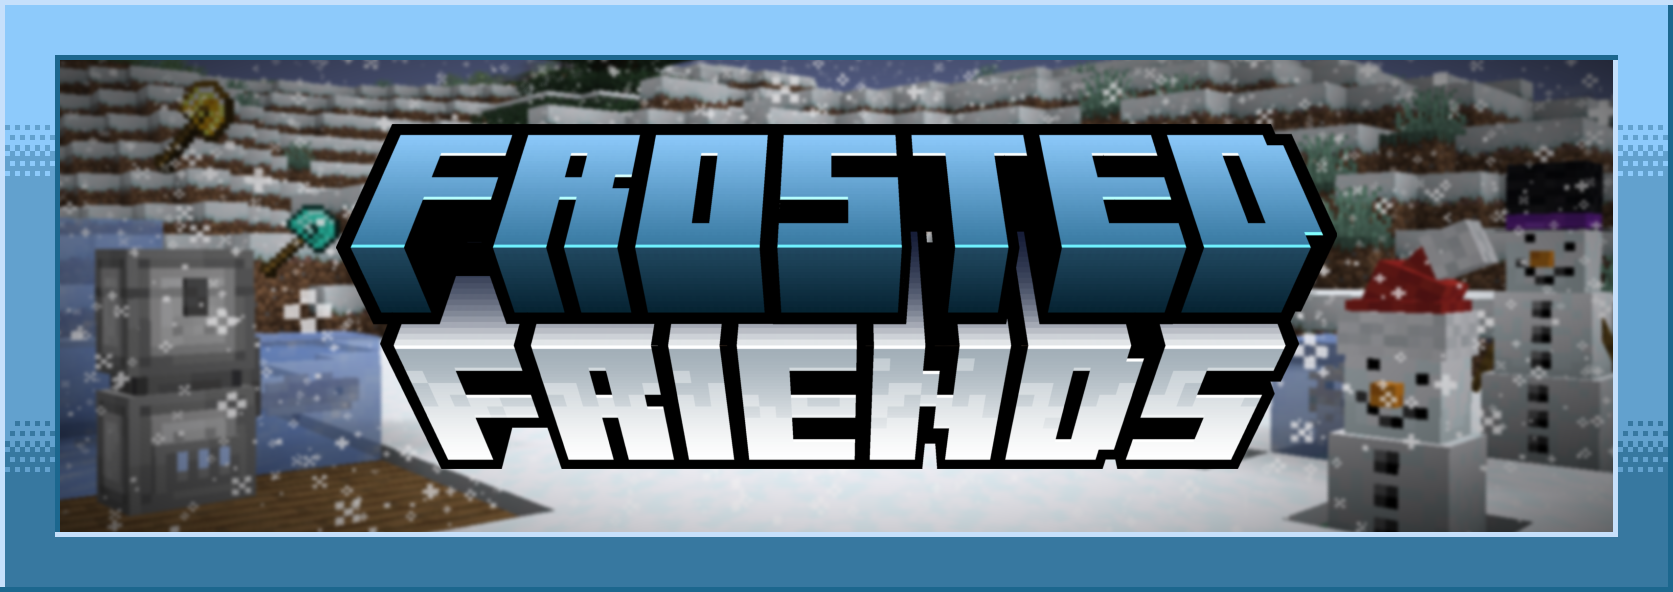 I found a Minecraft mod that allows you play with friends in your